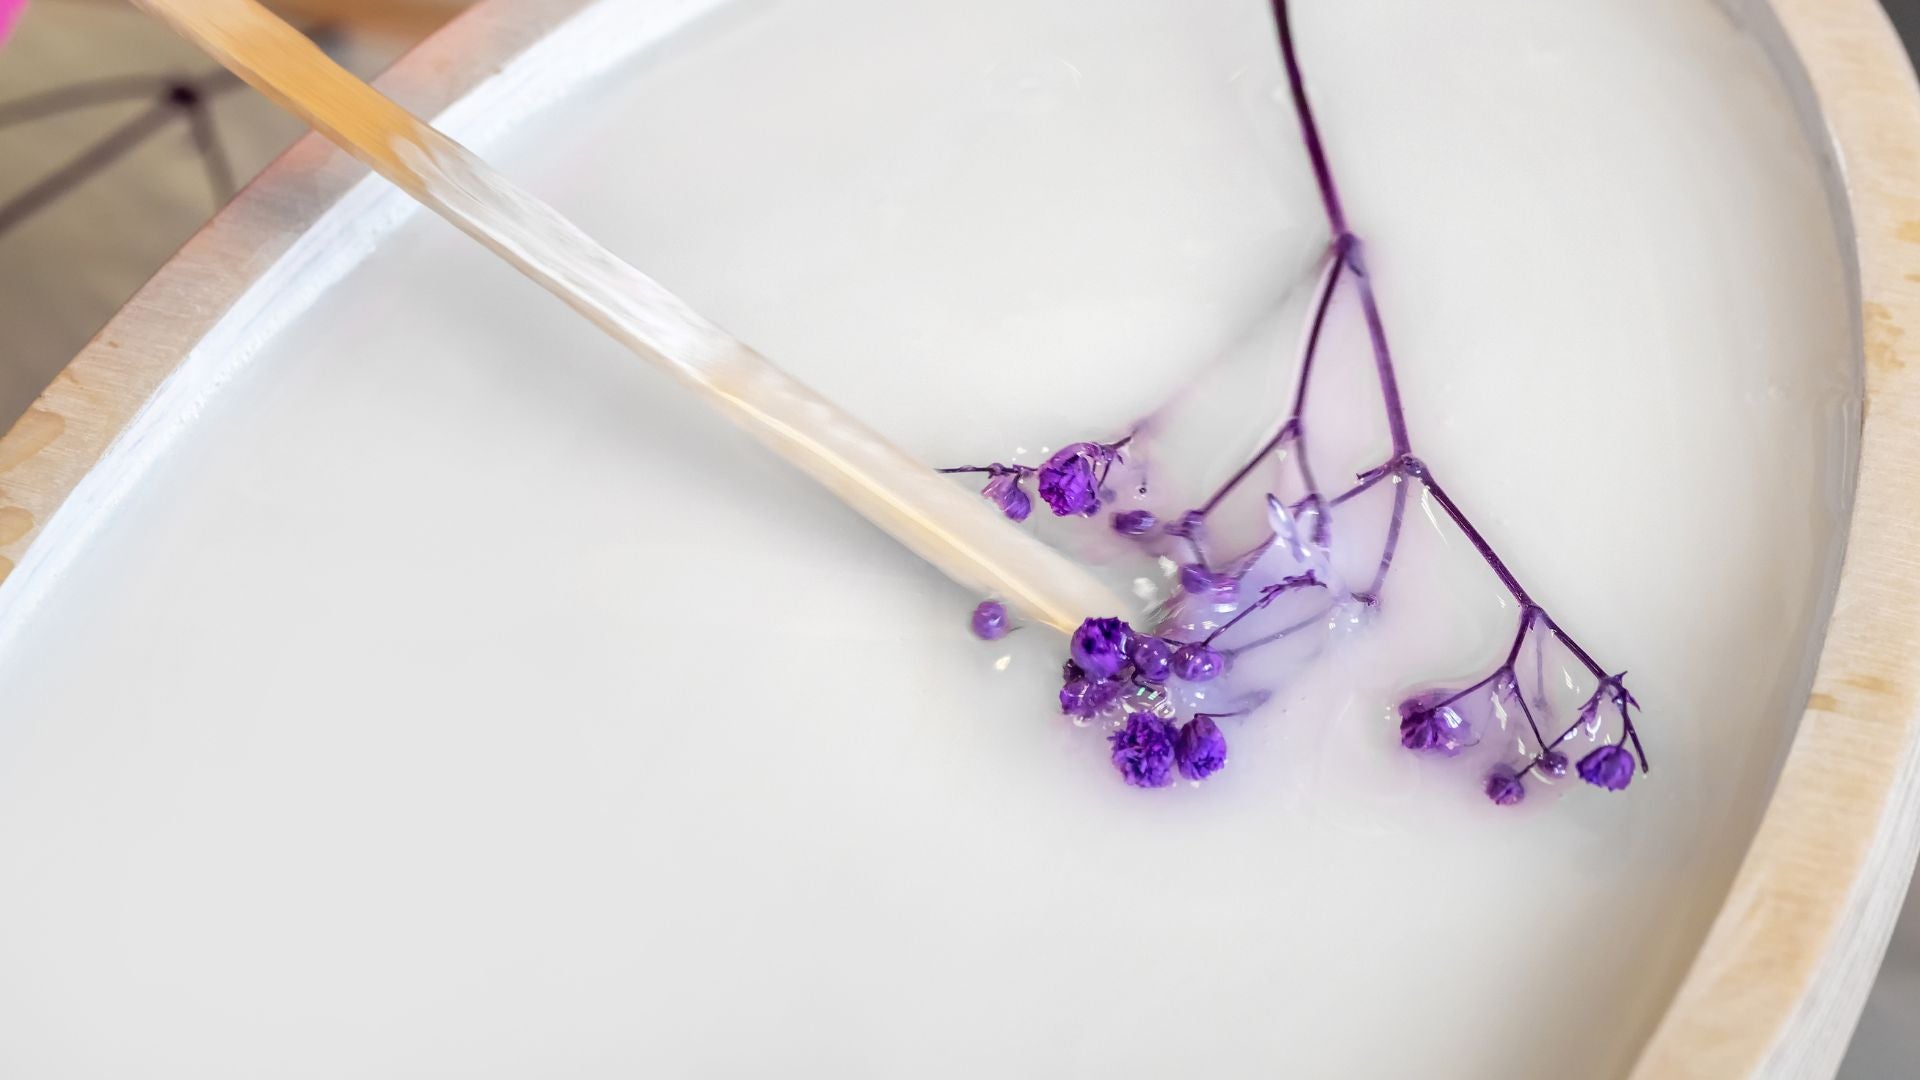 Pour thin layers of epoxy to avoid floating flowers